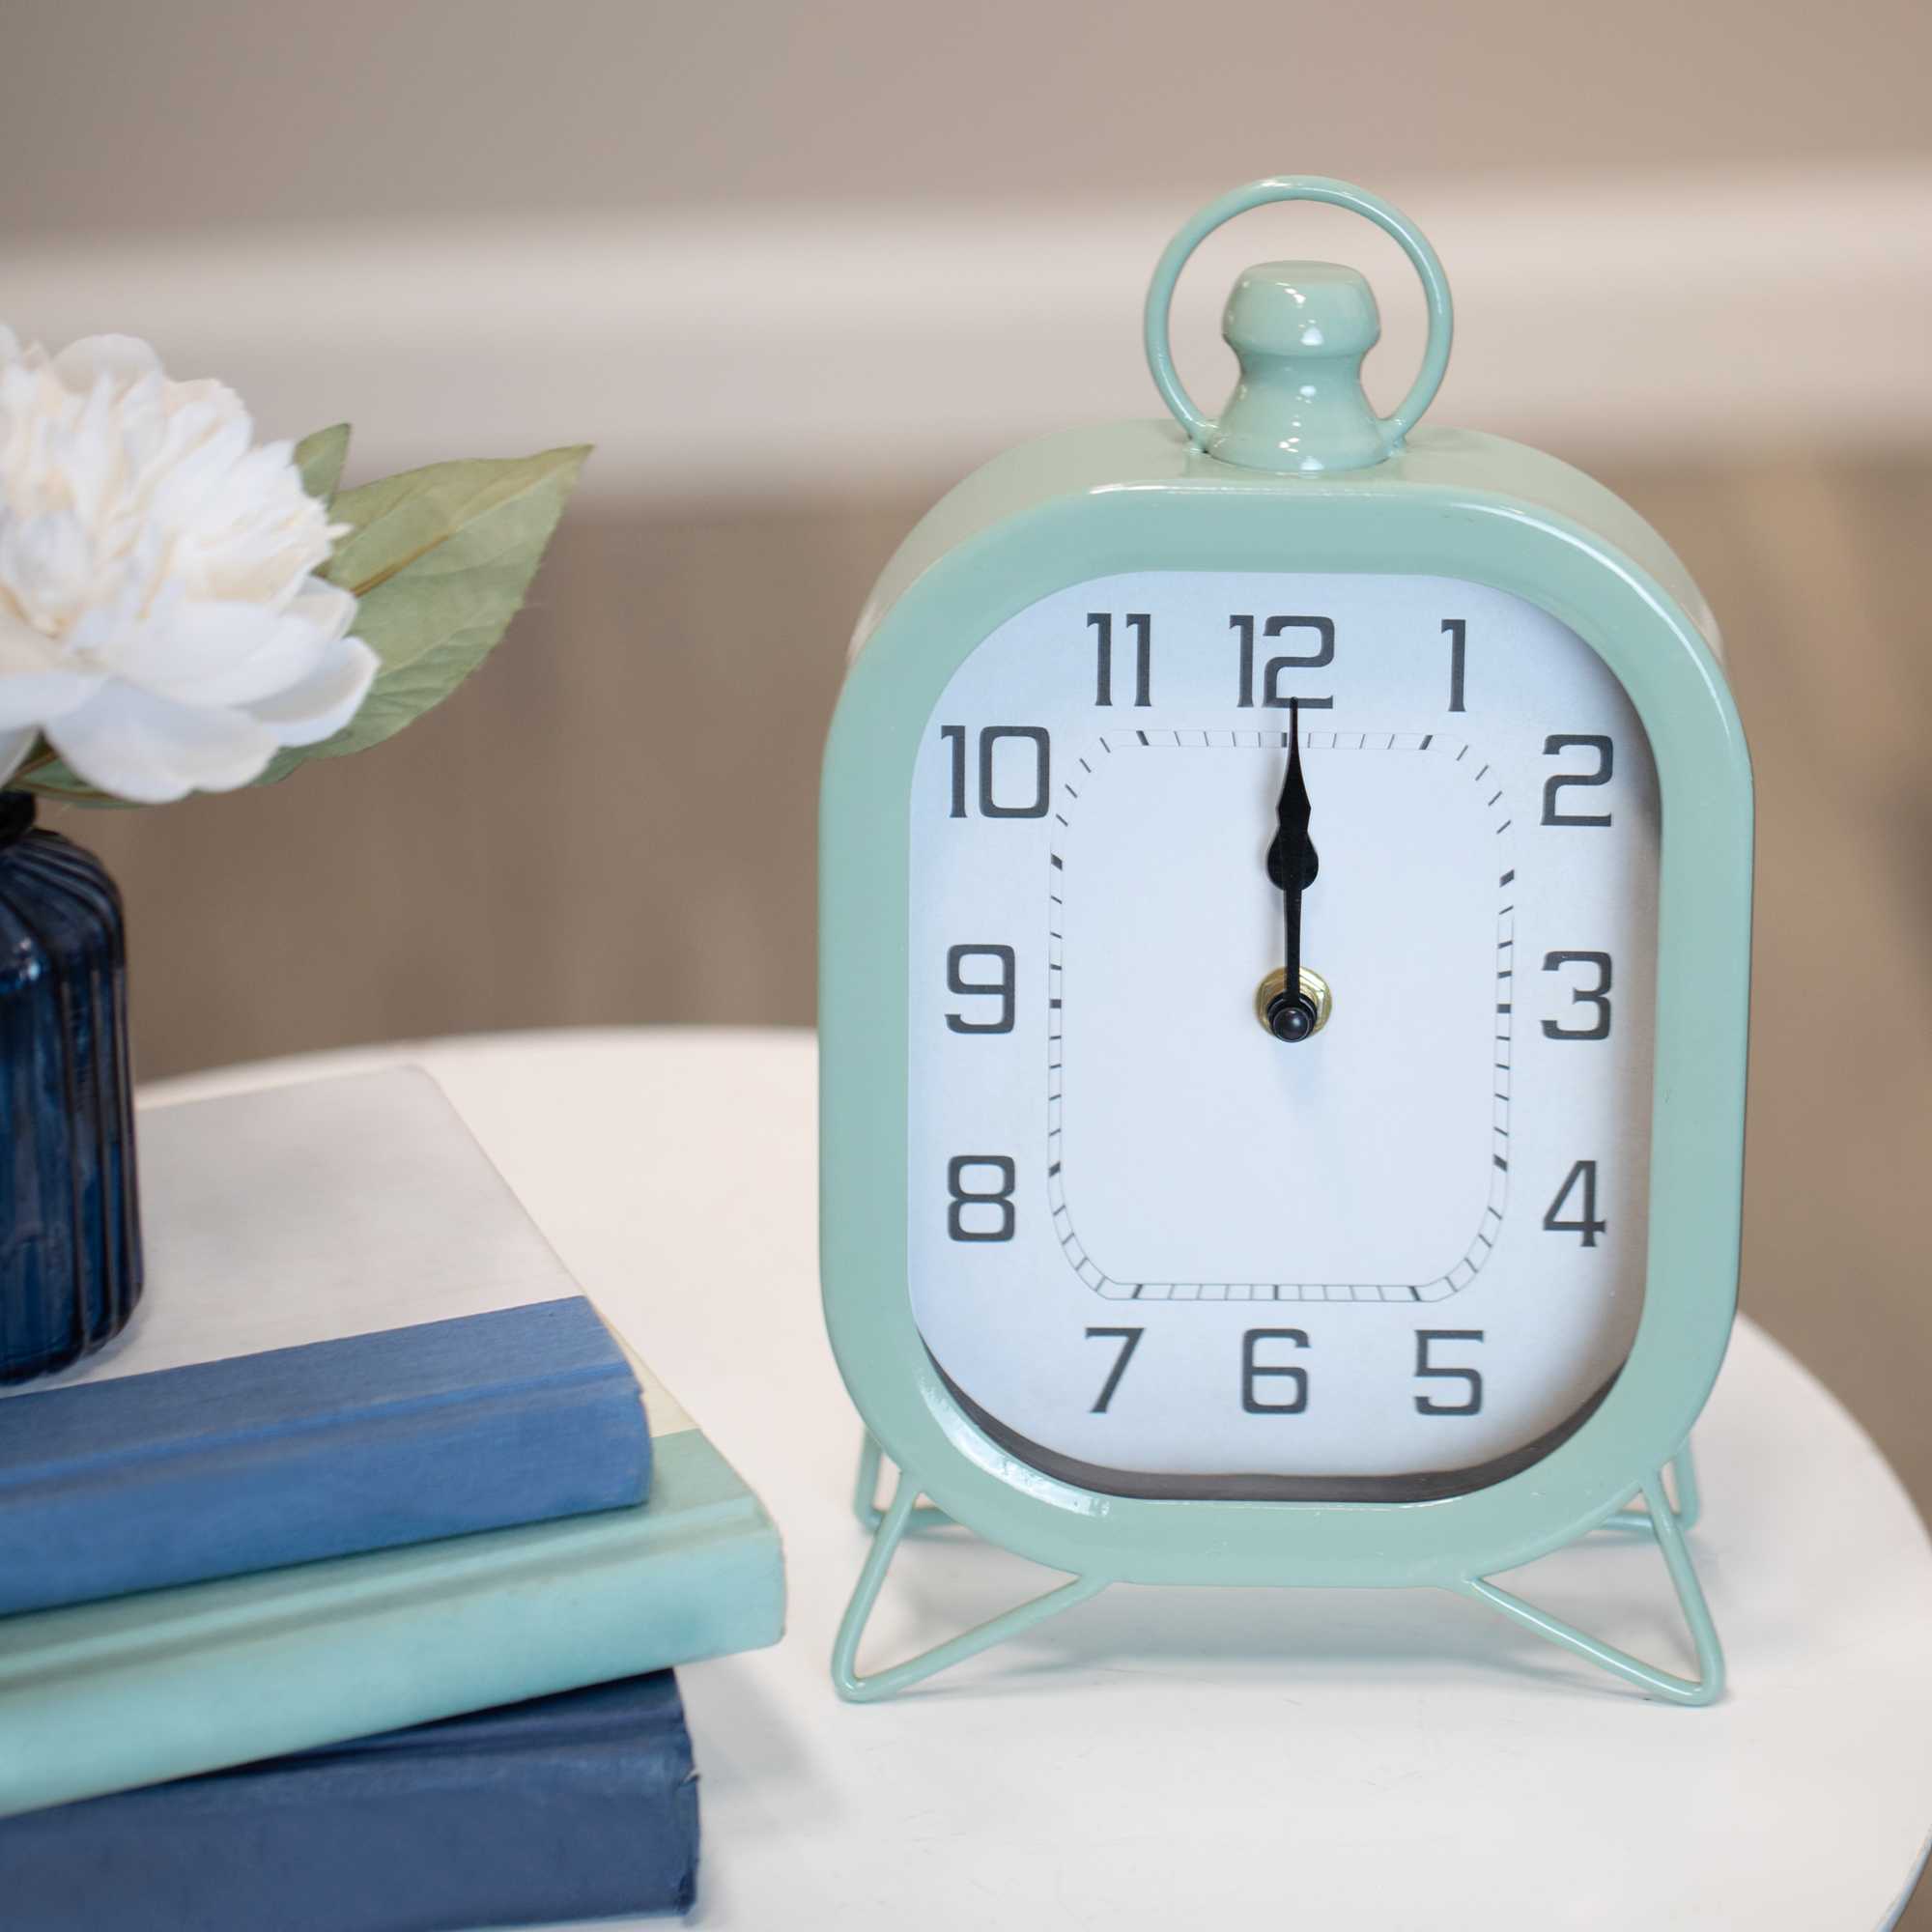 Rounded Square Table Top Clock with Semi-Glossy Green Finish